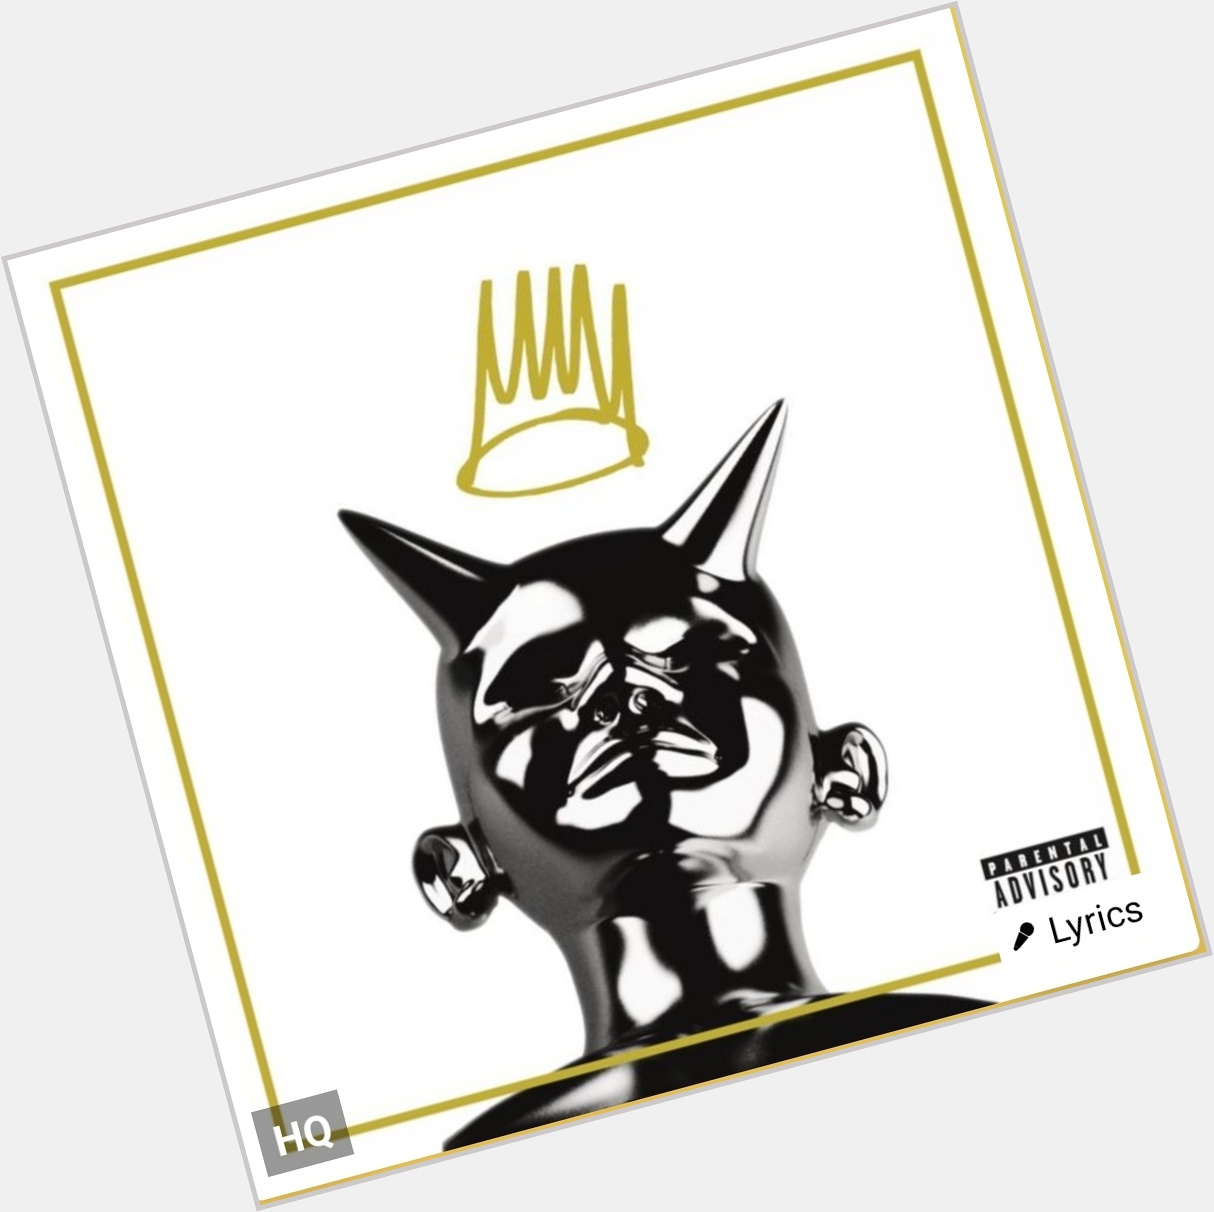 Cole\s Day Today Today, we\re Listening to only Cole & Lifestyle!

Happy Birthday Jermaine Lamar Cole 